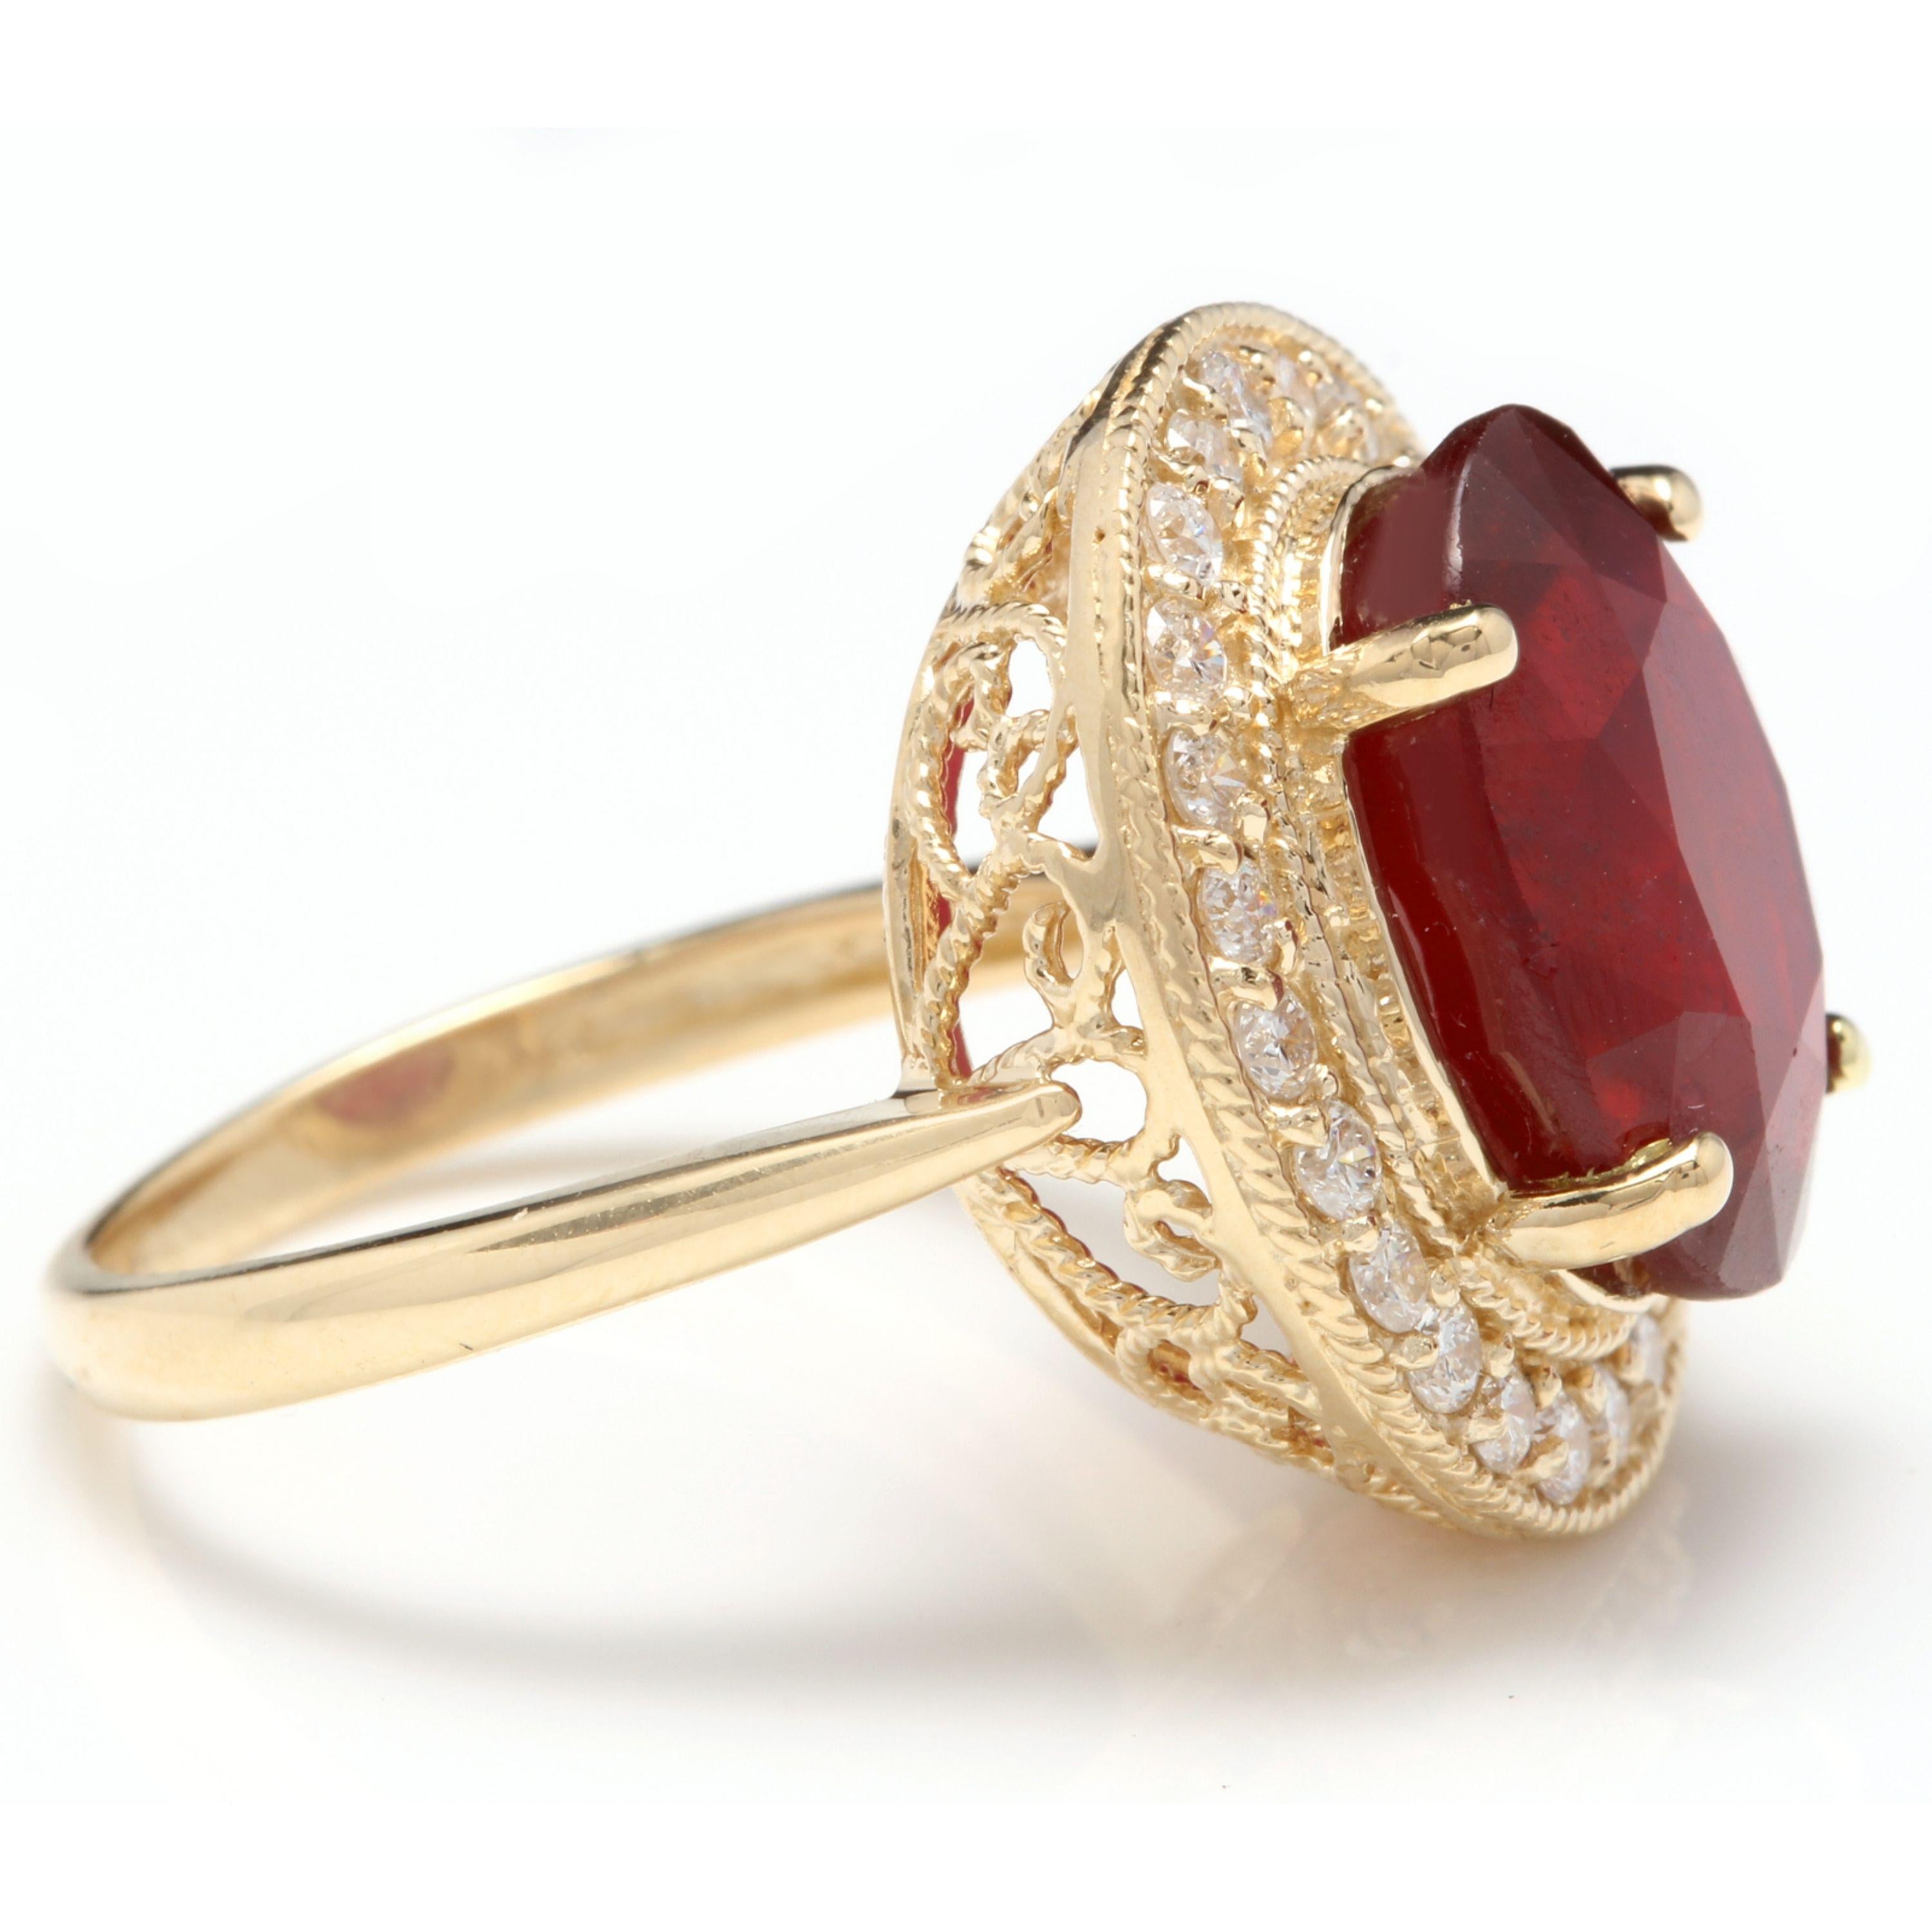 Mixed Cut 11.75 Carat Impressive Natural Red Ruby and Diamond 14 Karat Yellow Gold Ring For Sale